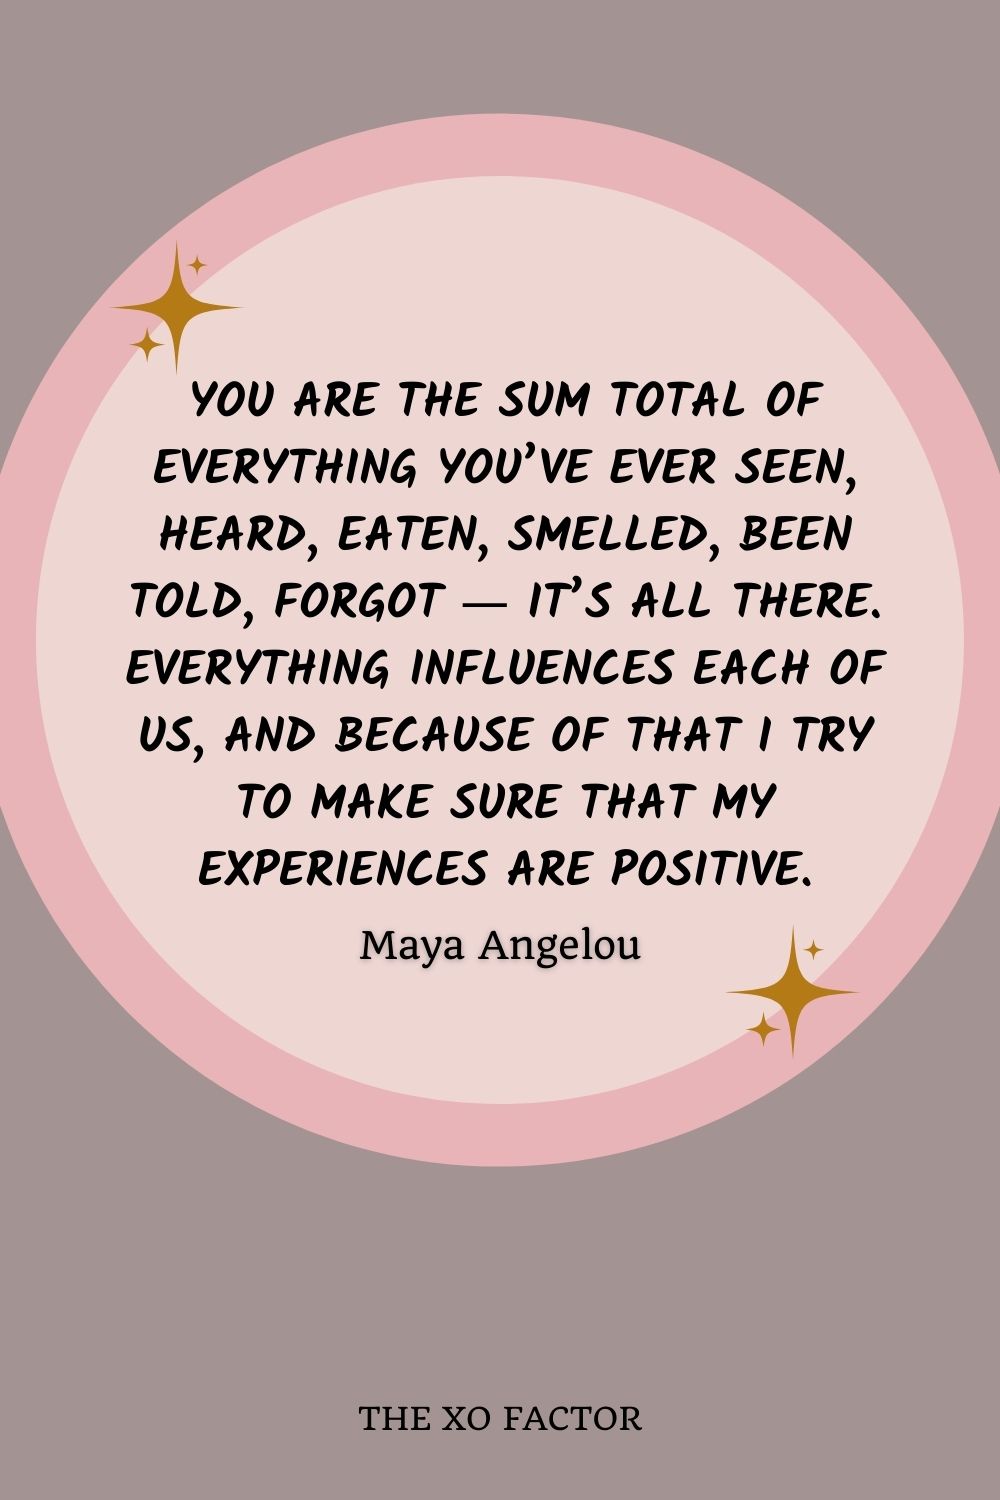 You are the sum total of everything you’ve ever seen, heard, eaten, smelled, been told, forgot ― it’s all there. Everything influences each of us, and because of that I try to make sure that my experiences are positive.” ― Maya Angelou